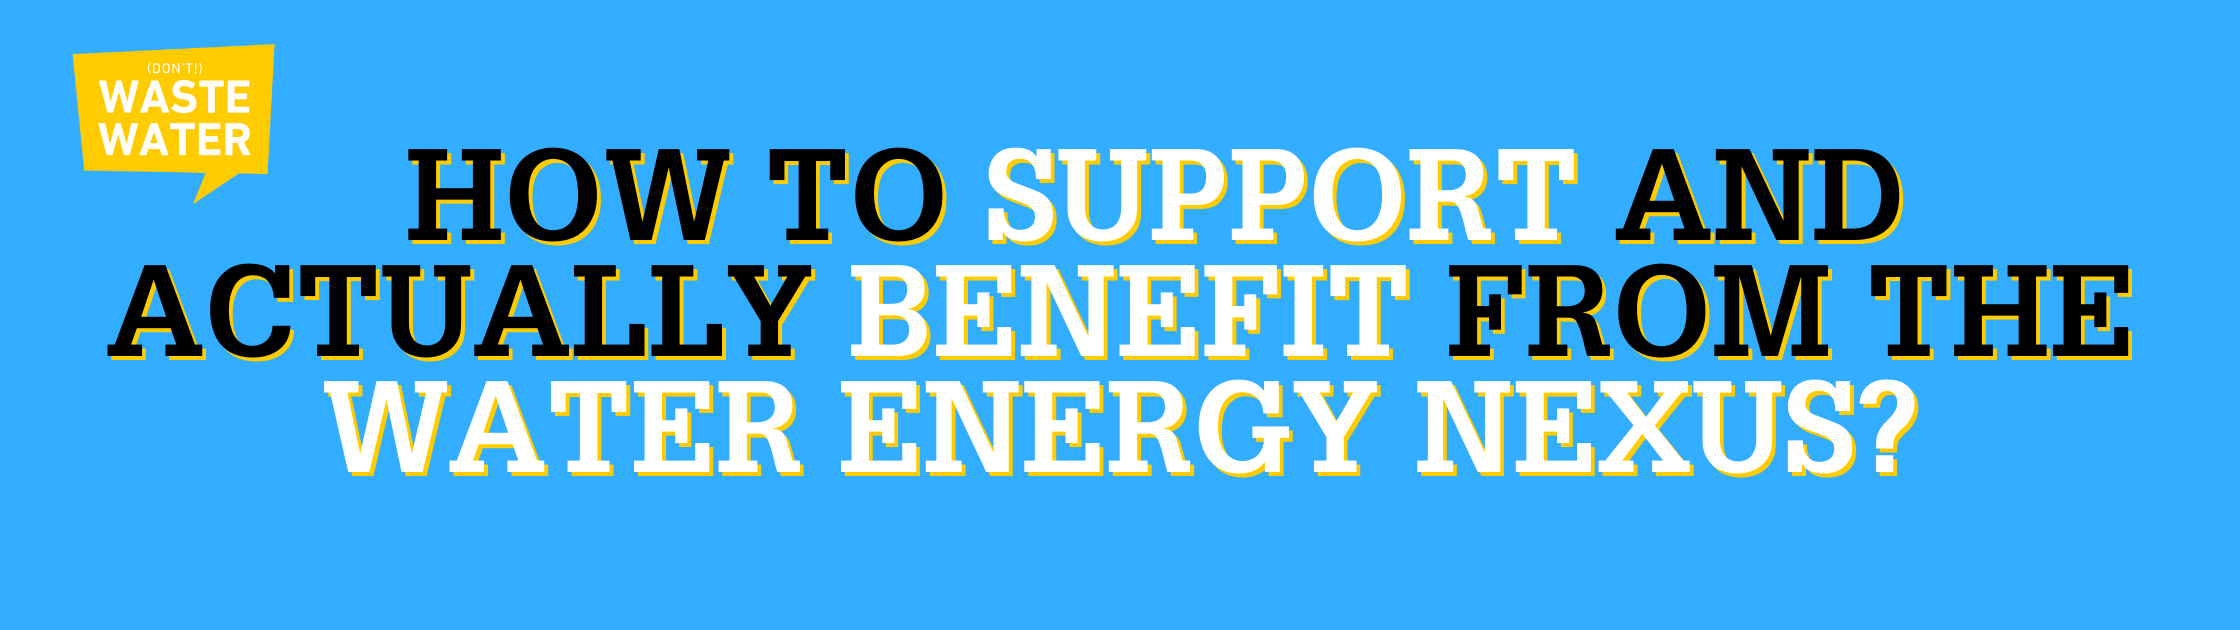 How to Support and Actually Benefit from the Water Energy Nexus?